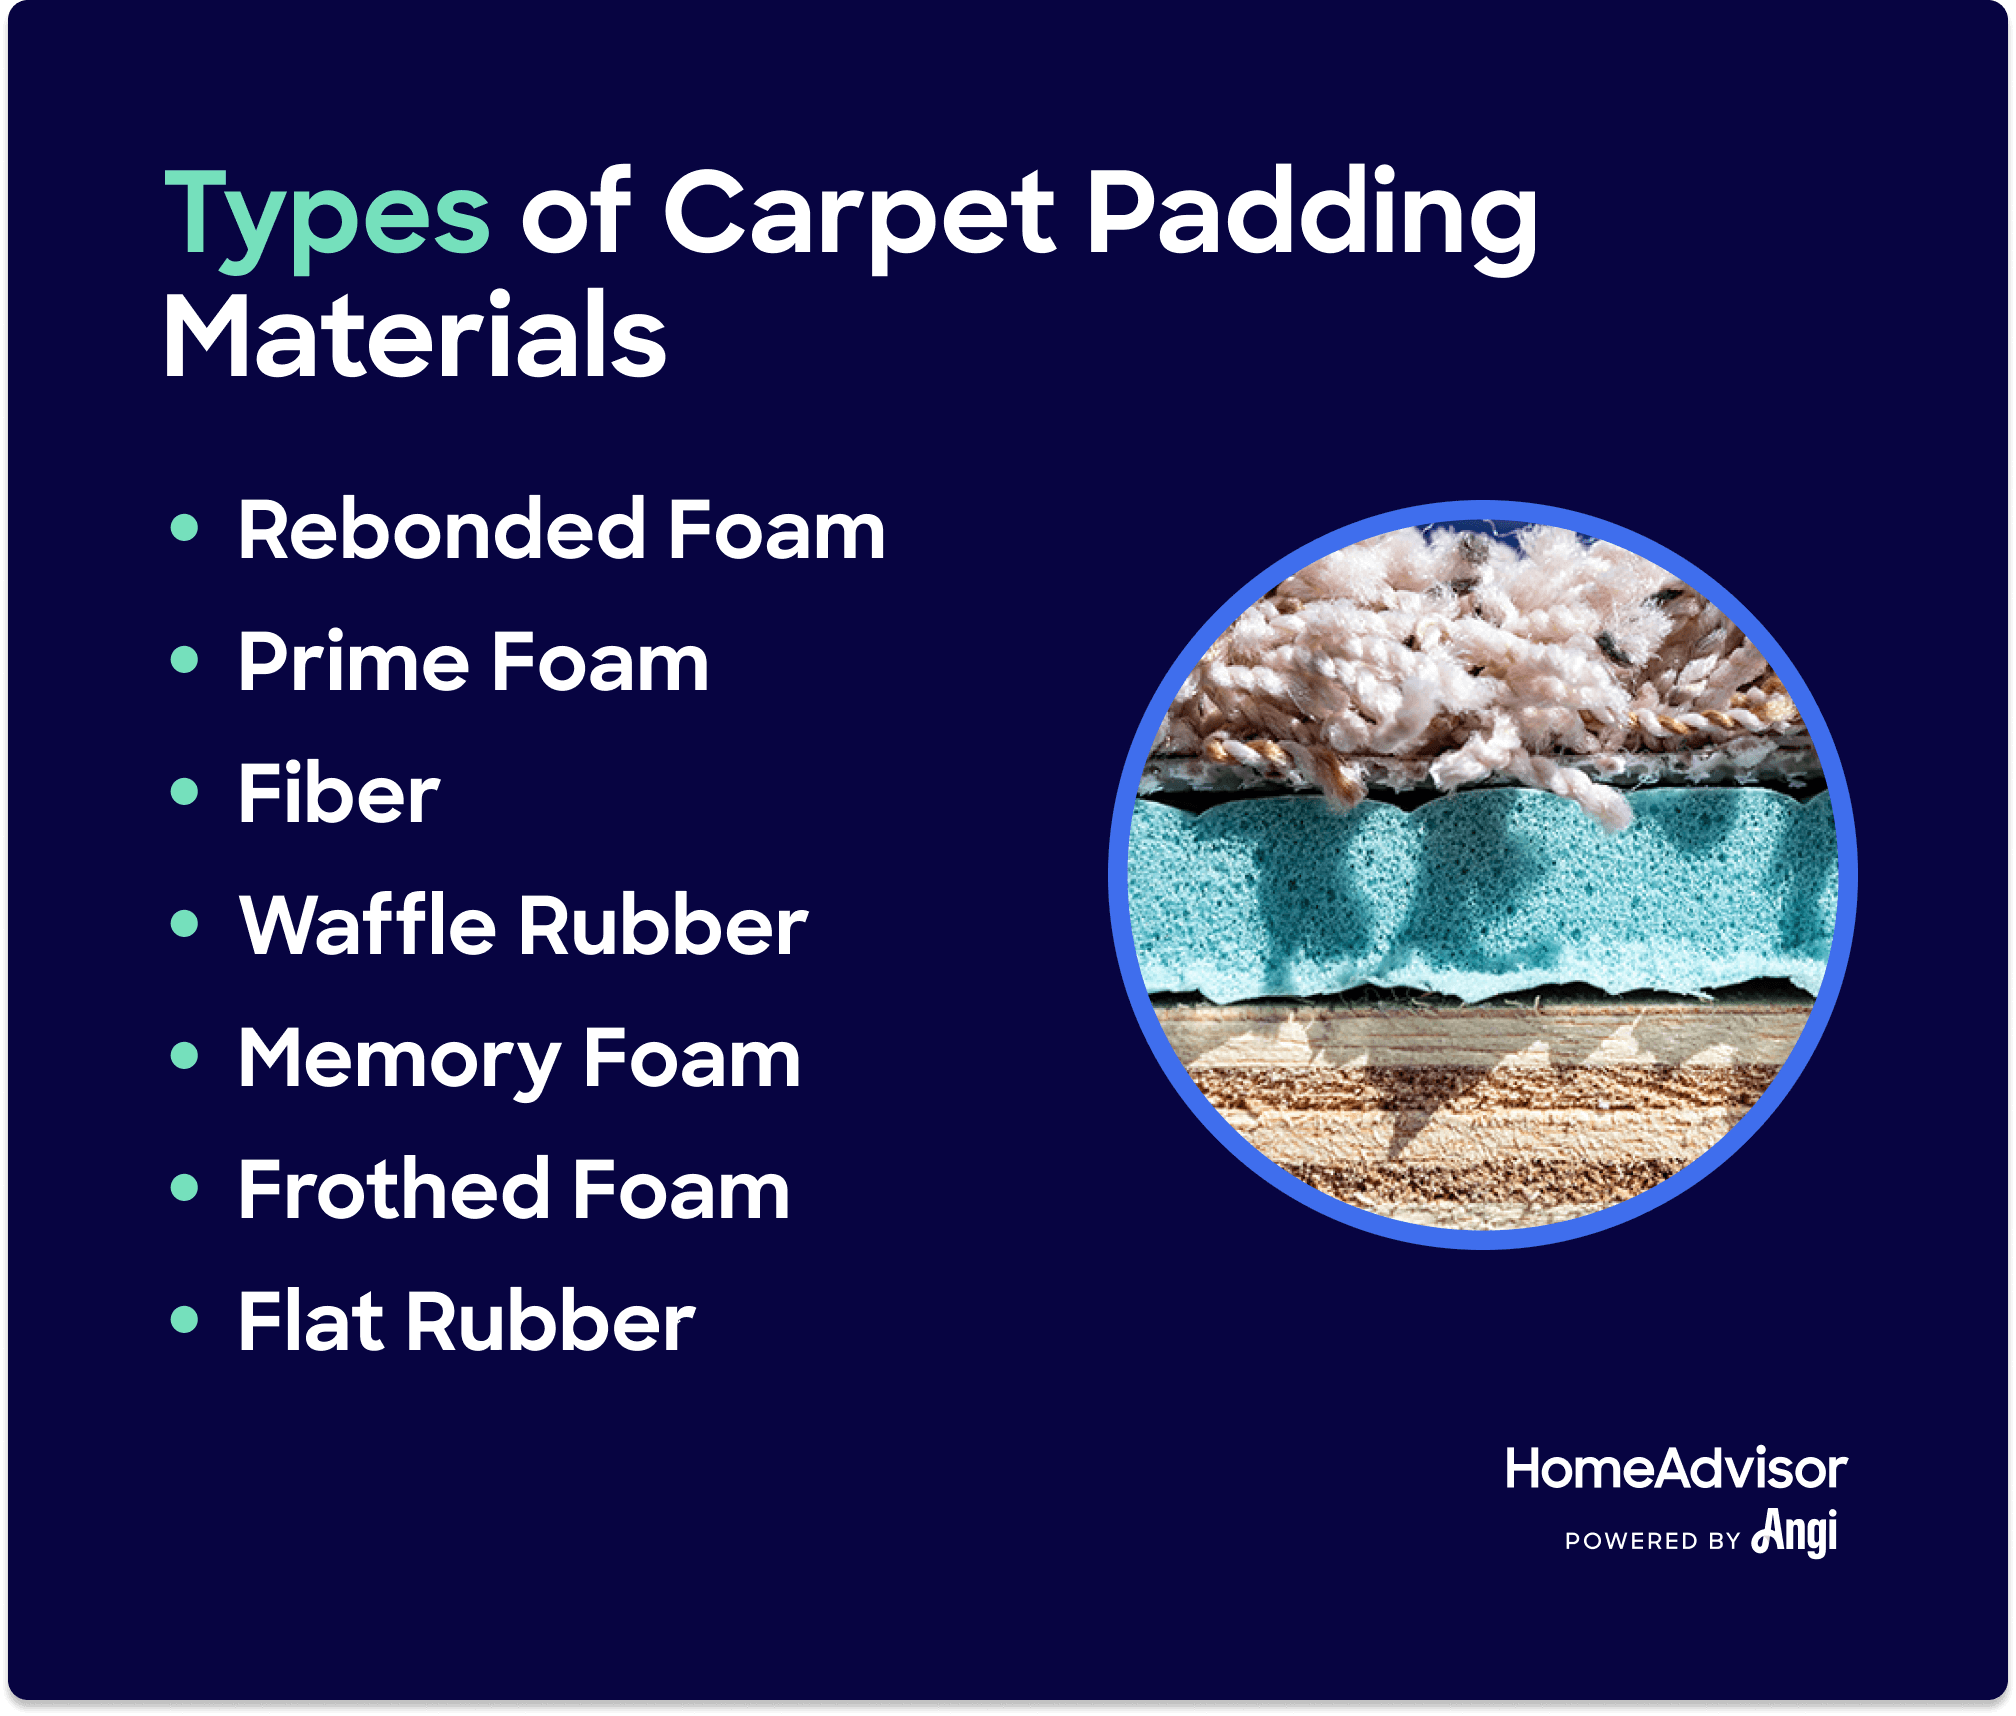 How Much Does Carpet Padding Cost